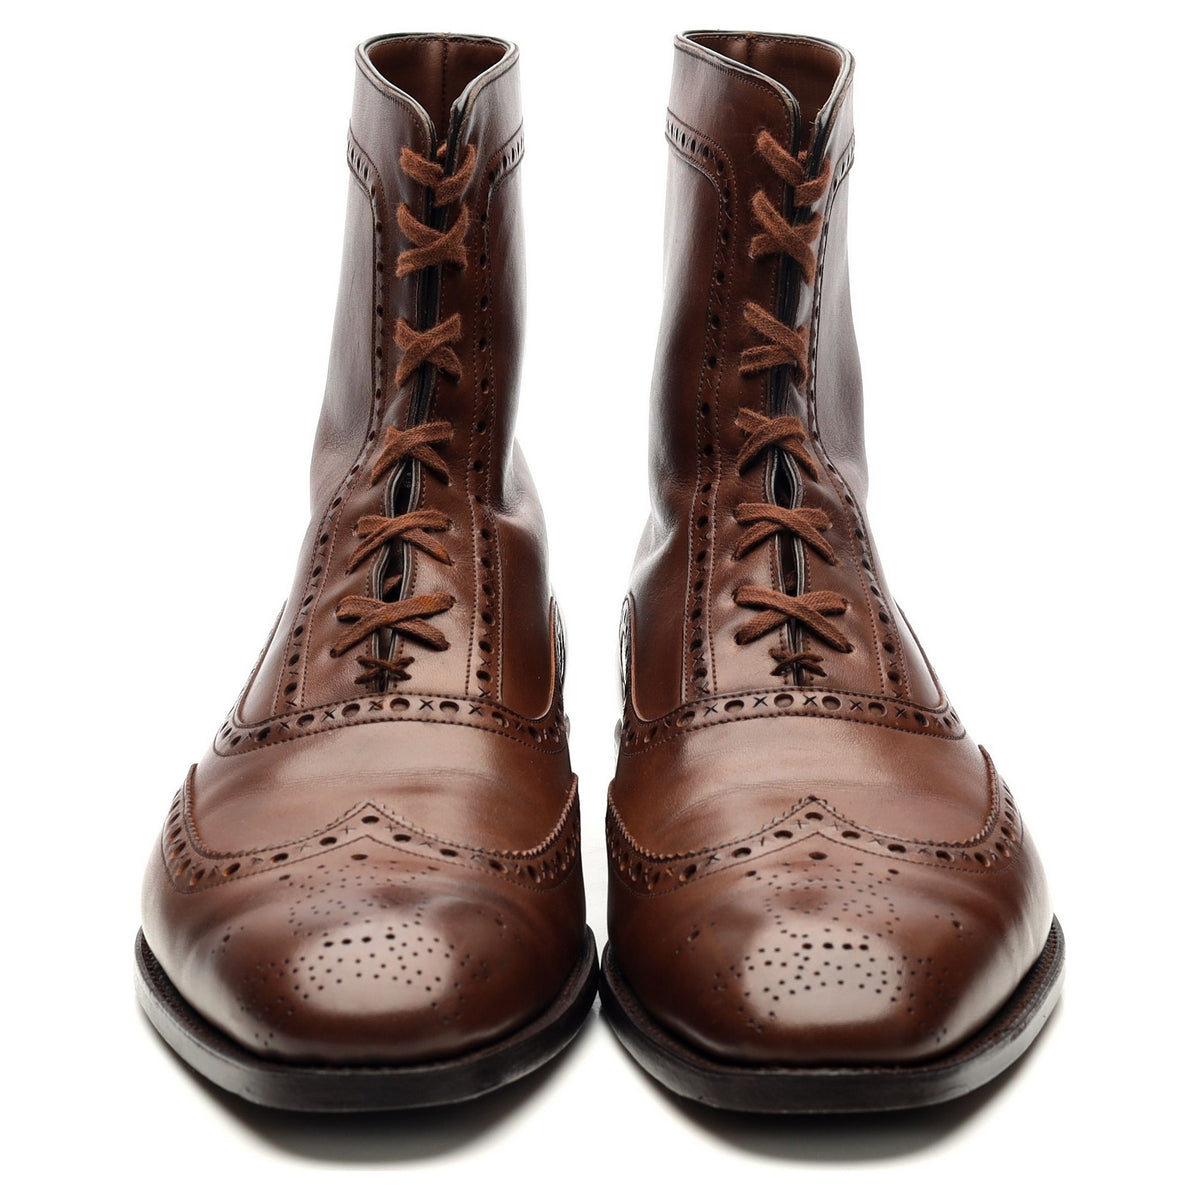 Brown Leather Boots UK 8 US 9